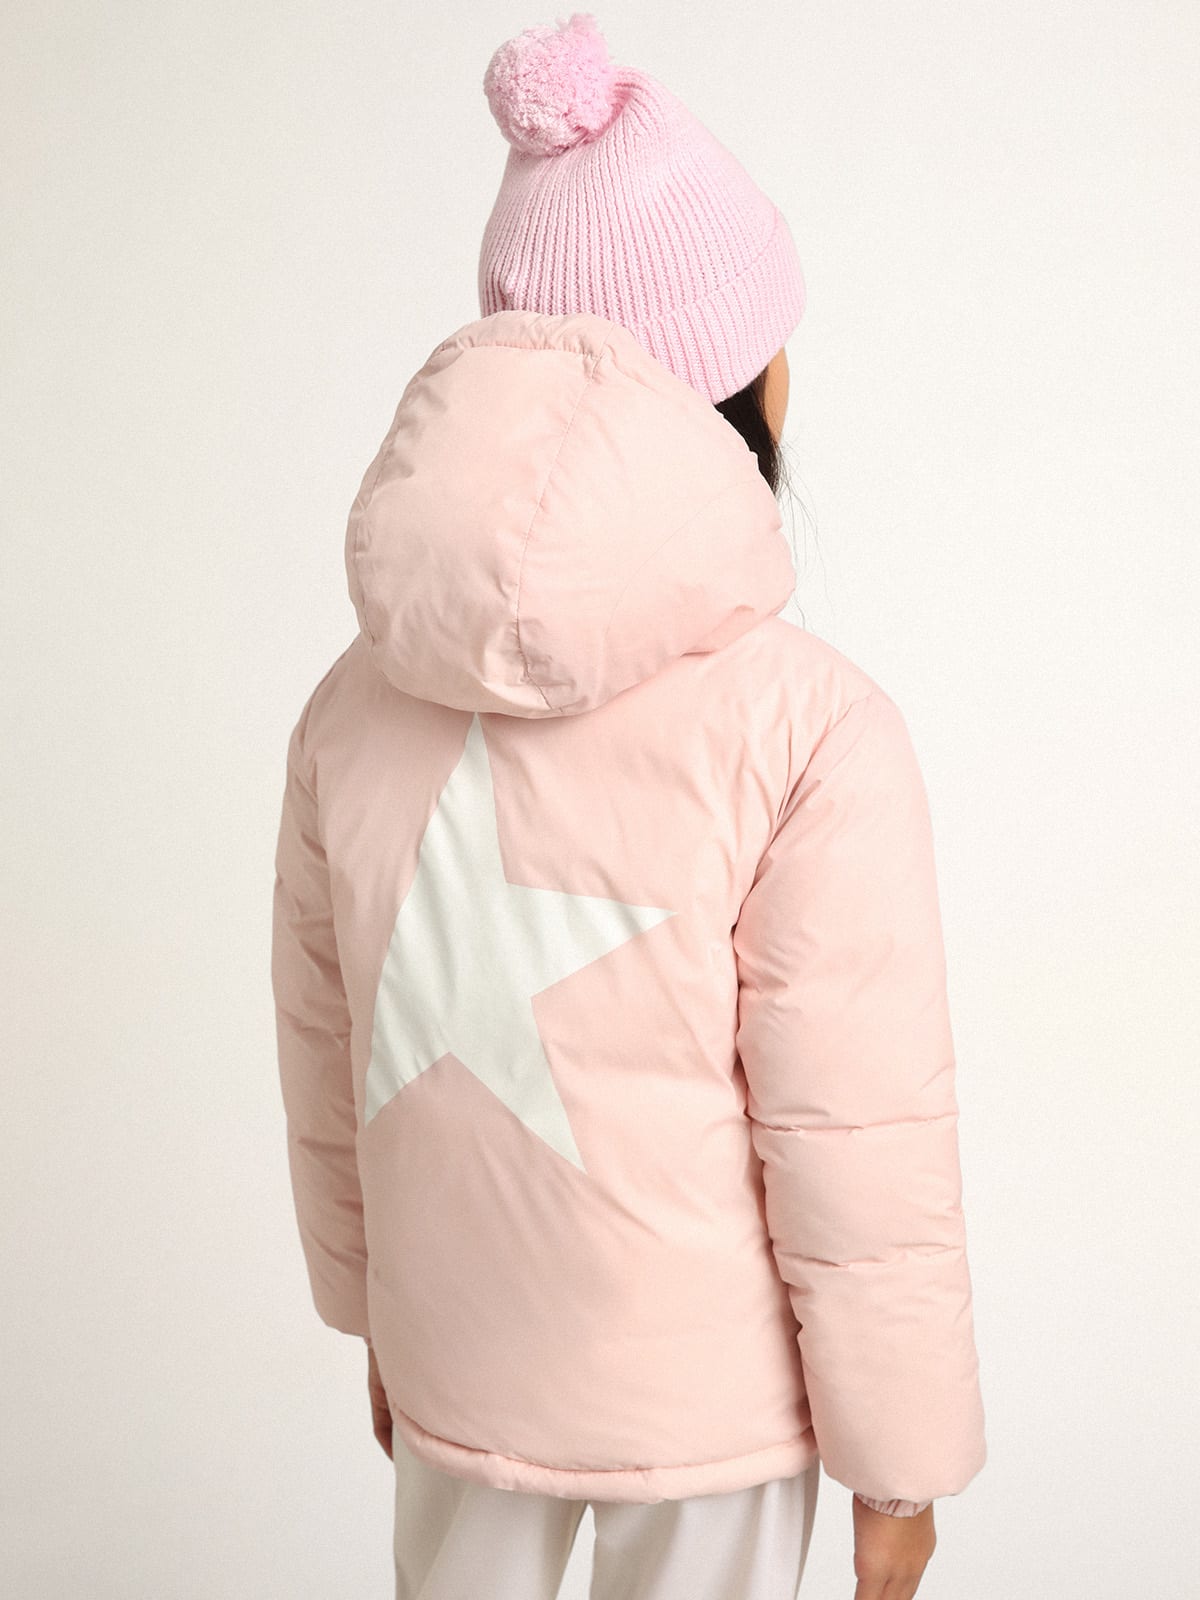 Golden Goose - Pink Star Collection padded jacket with hood and white maxi star on the back in 